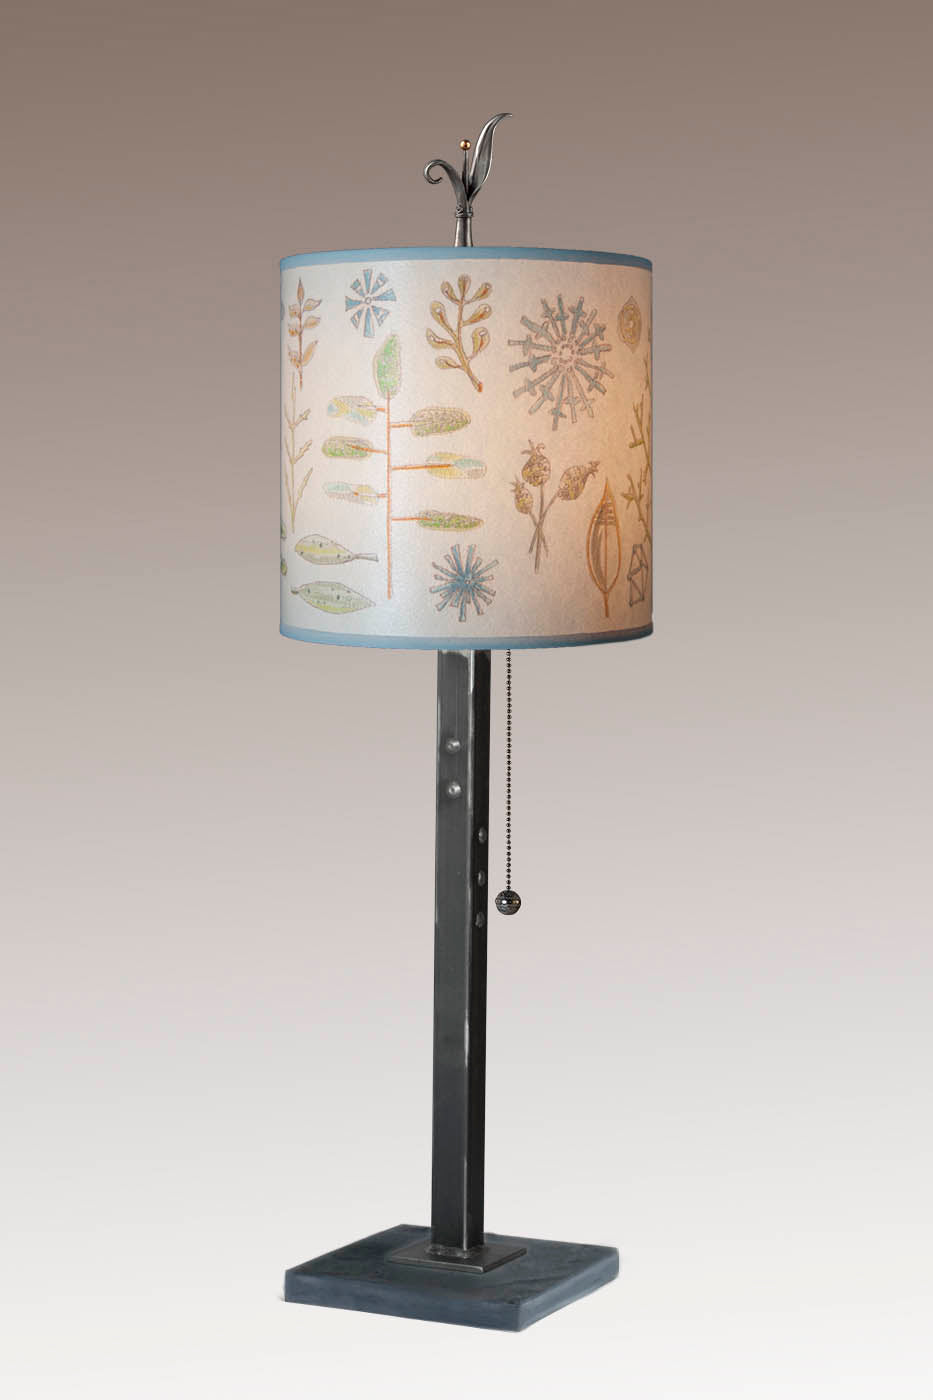 Janna Ugone & Co Table Lamp Steel Table Lamp Medium Drum Shade in Field Chart